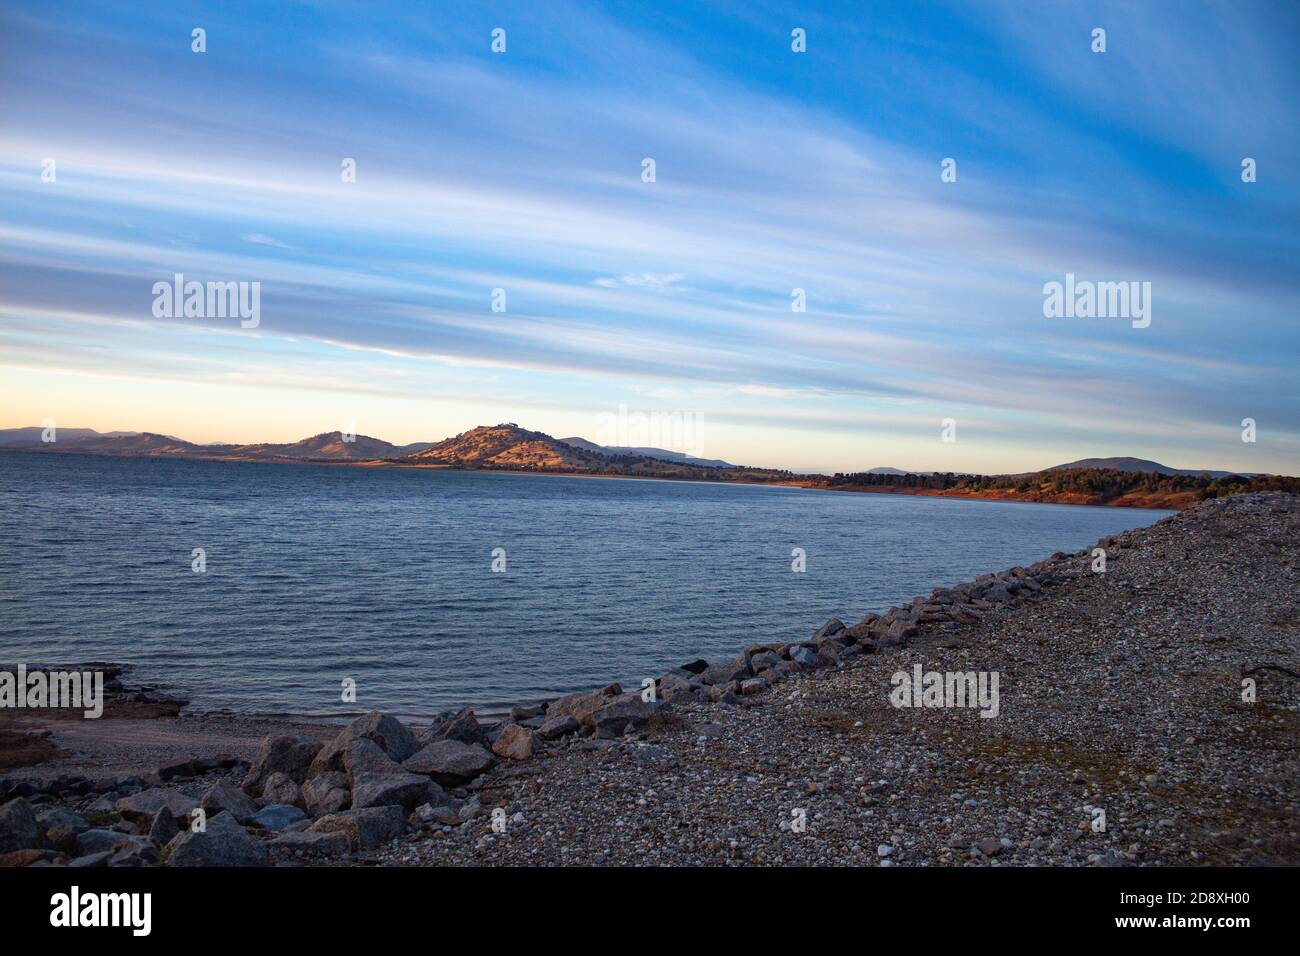 Blue water filled lake dam with rocky foreshore and small hills in background against blue sky Stock Photo